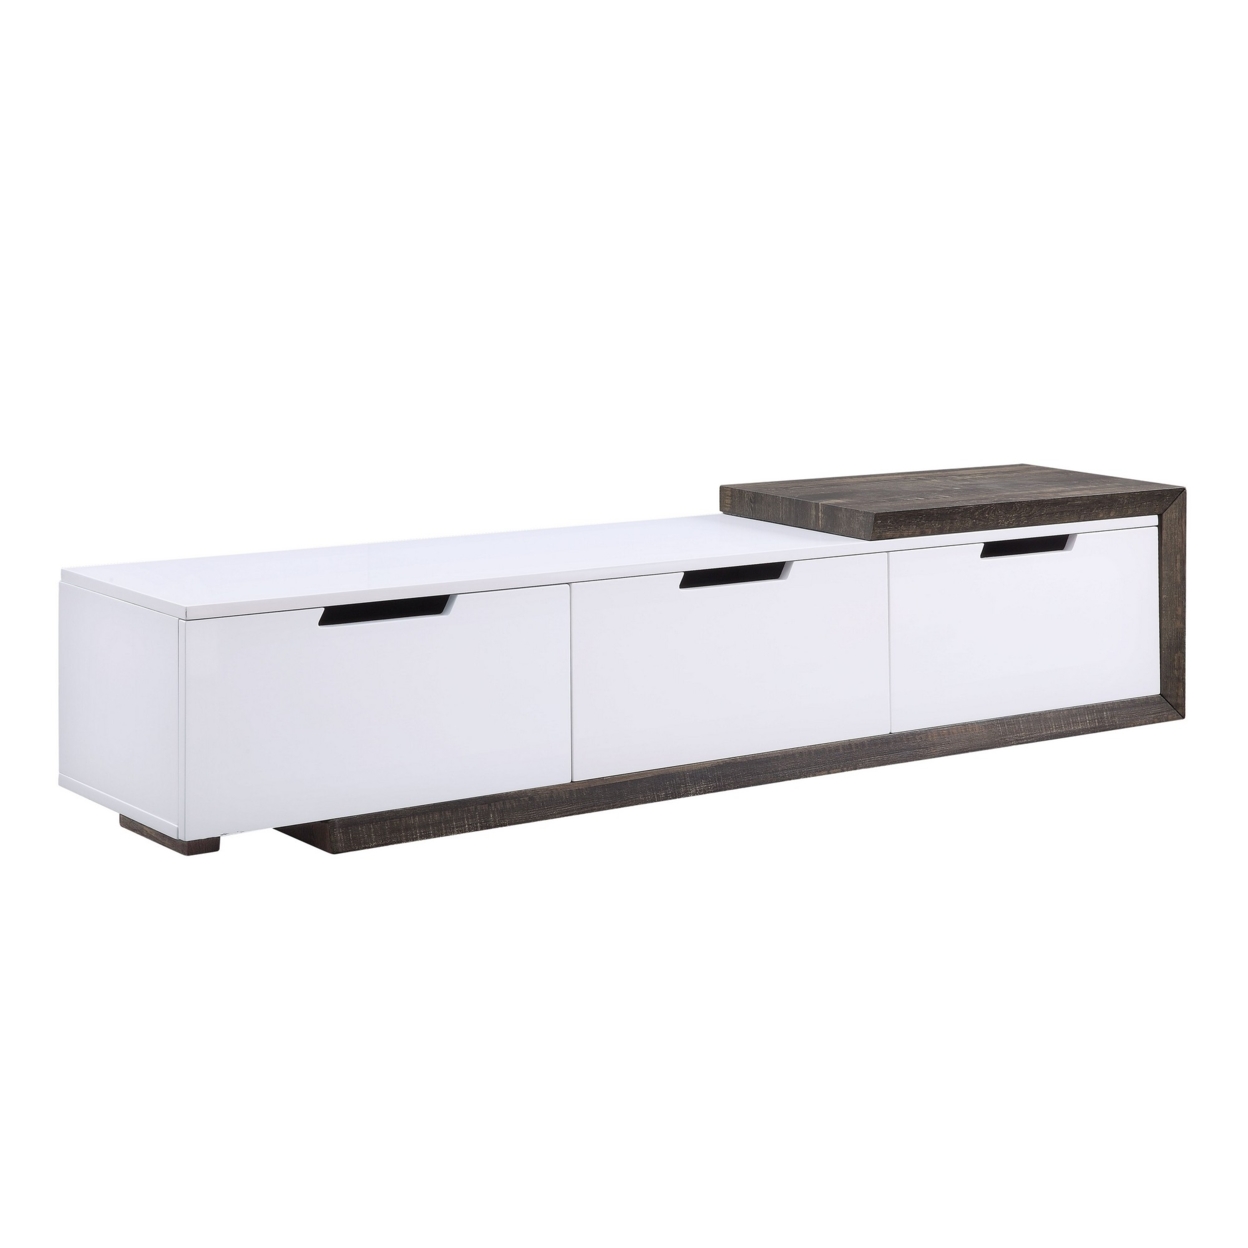 TV Stand With Extendable Top And 3 Drawers, White And Brown- Saltoro Sherpi